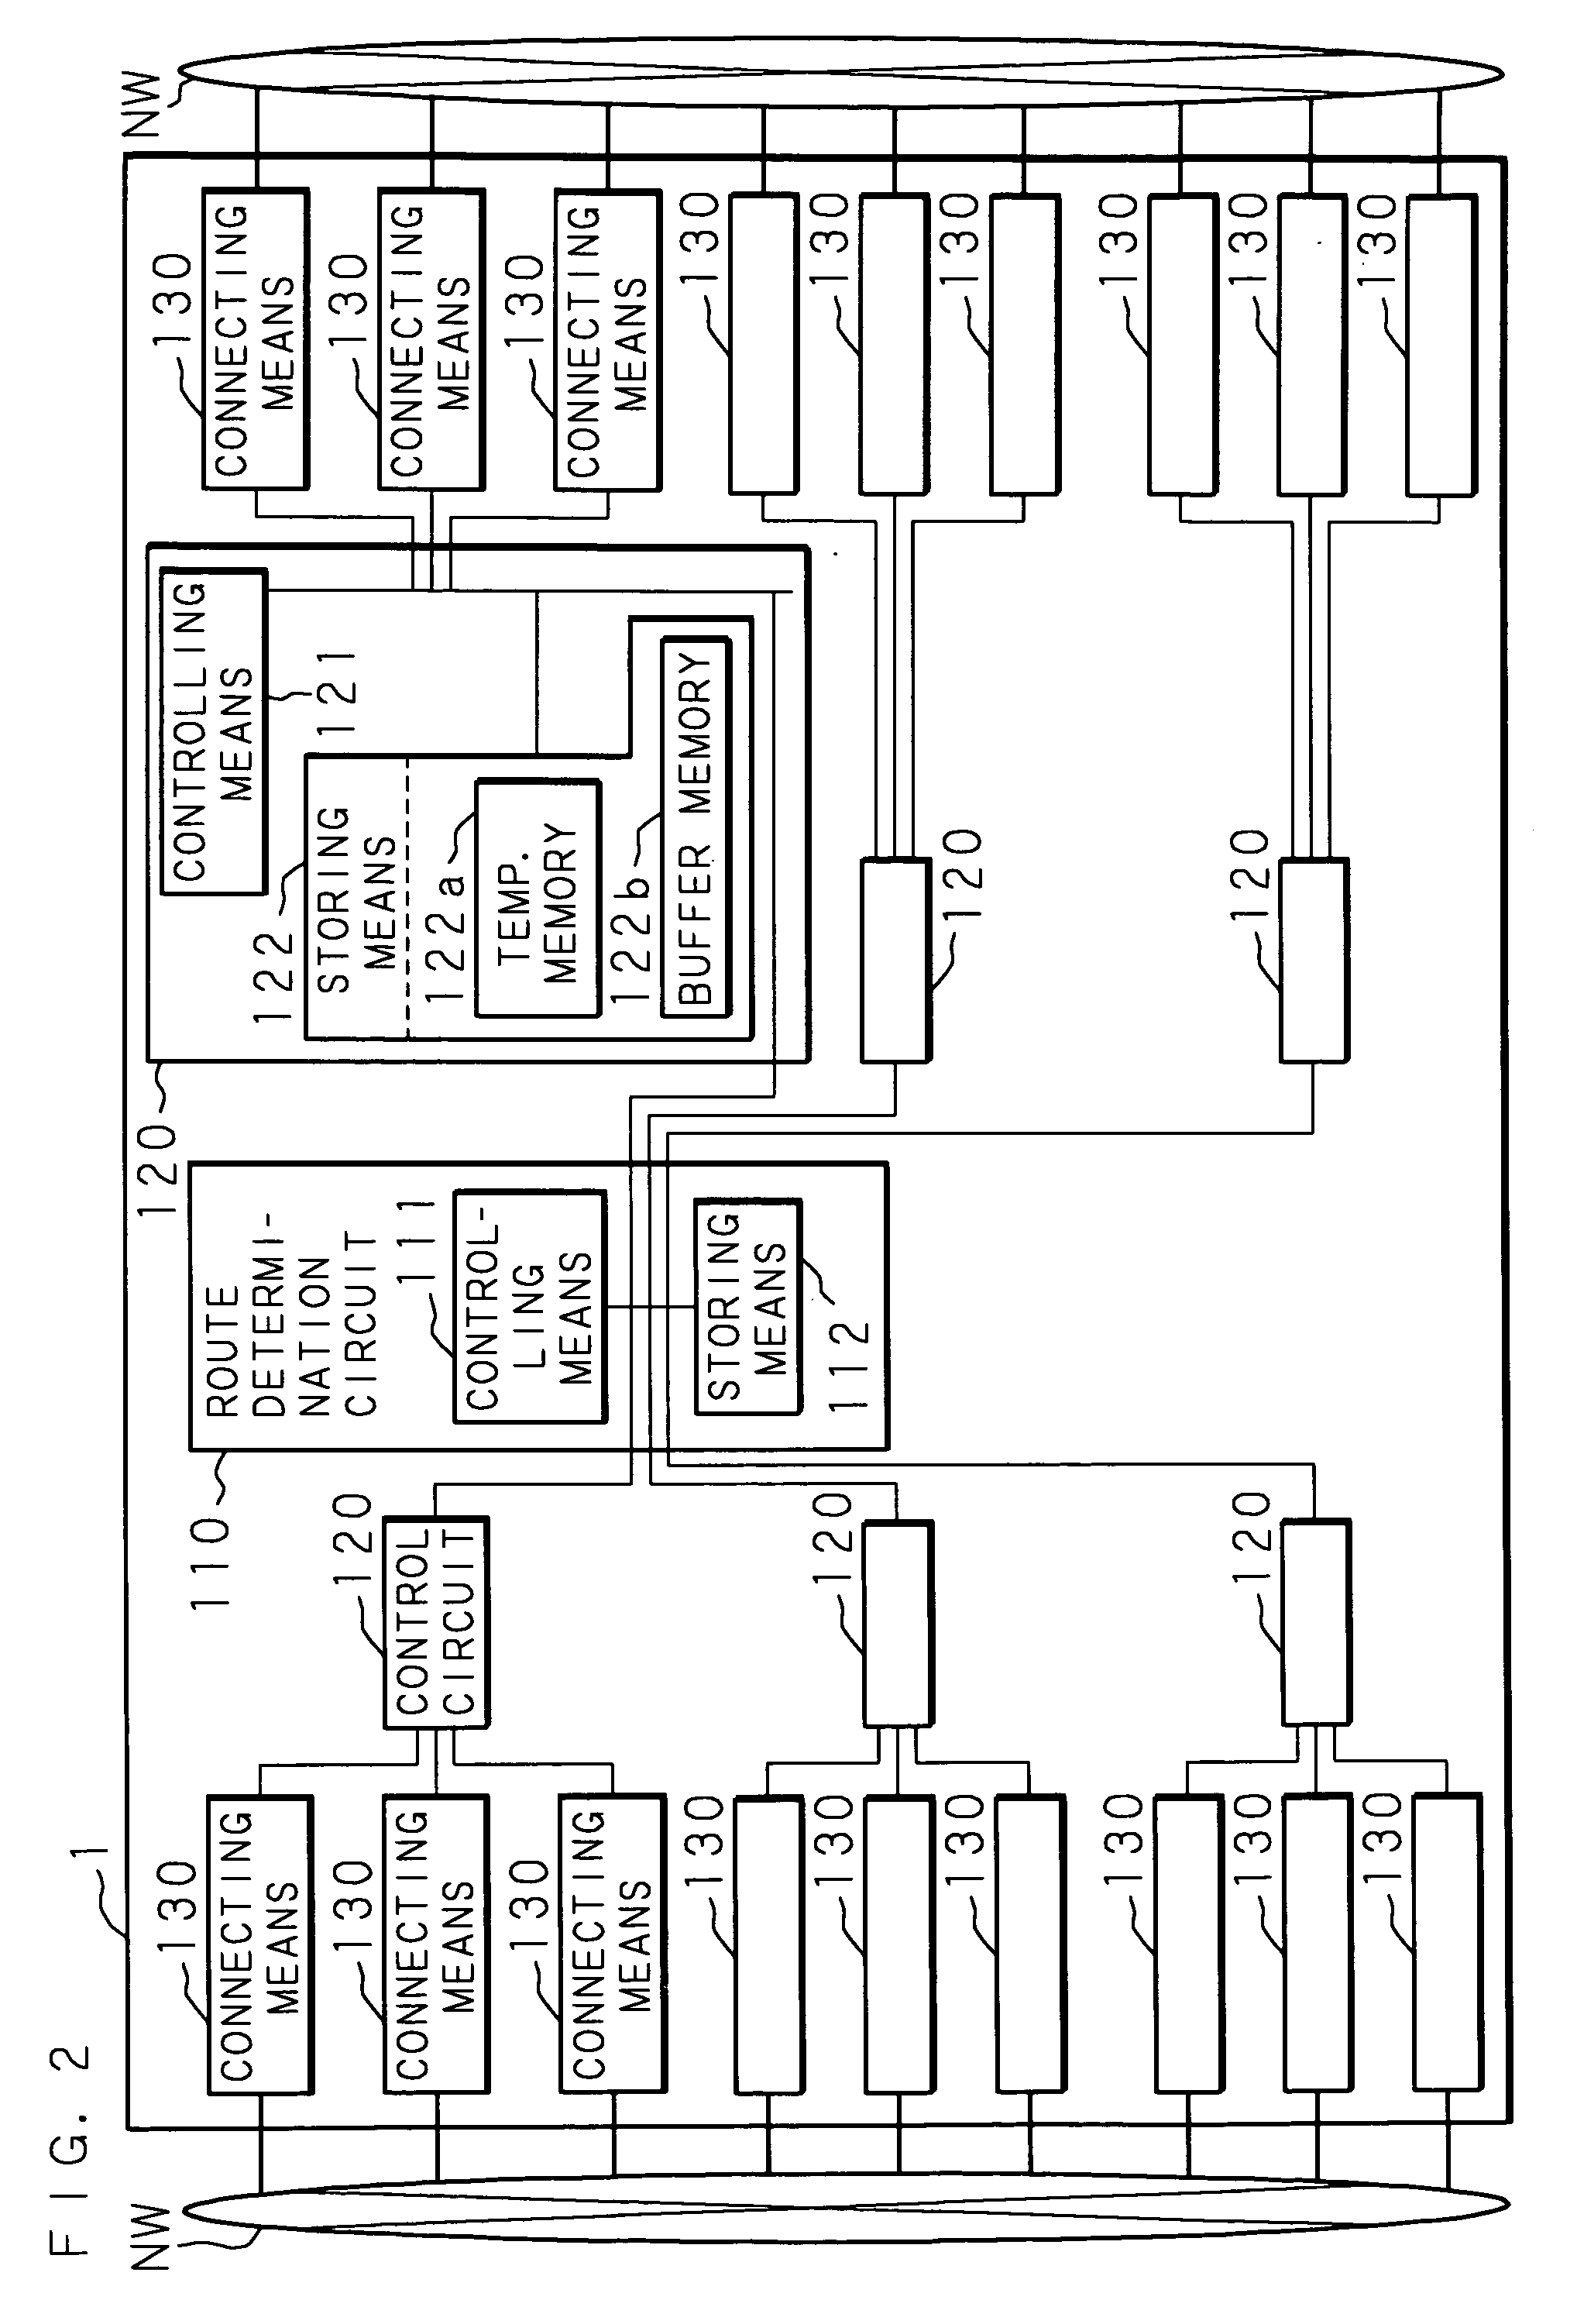 Repeater, Communication System, Control Circuit, Connector, and Computer Program